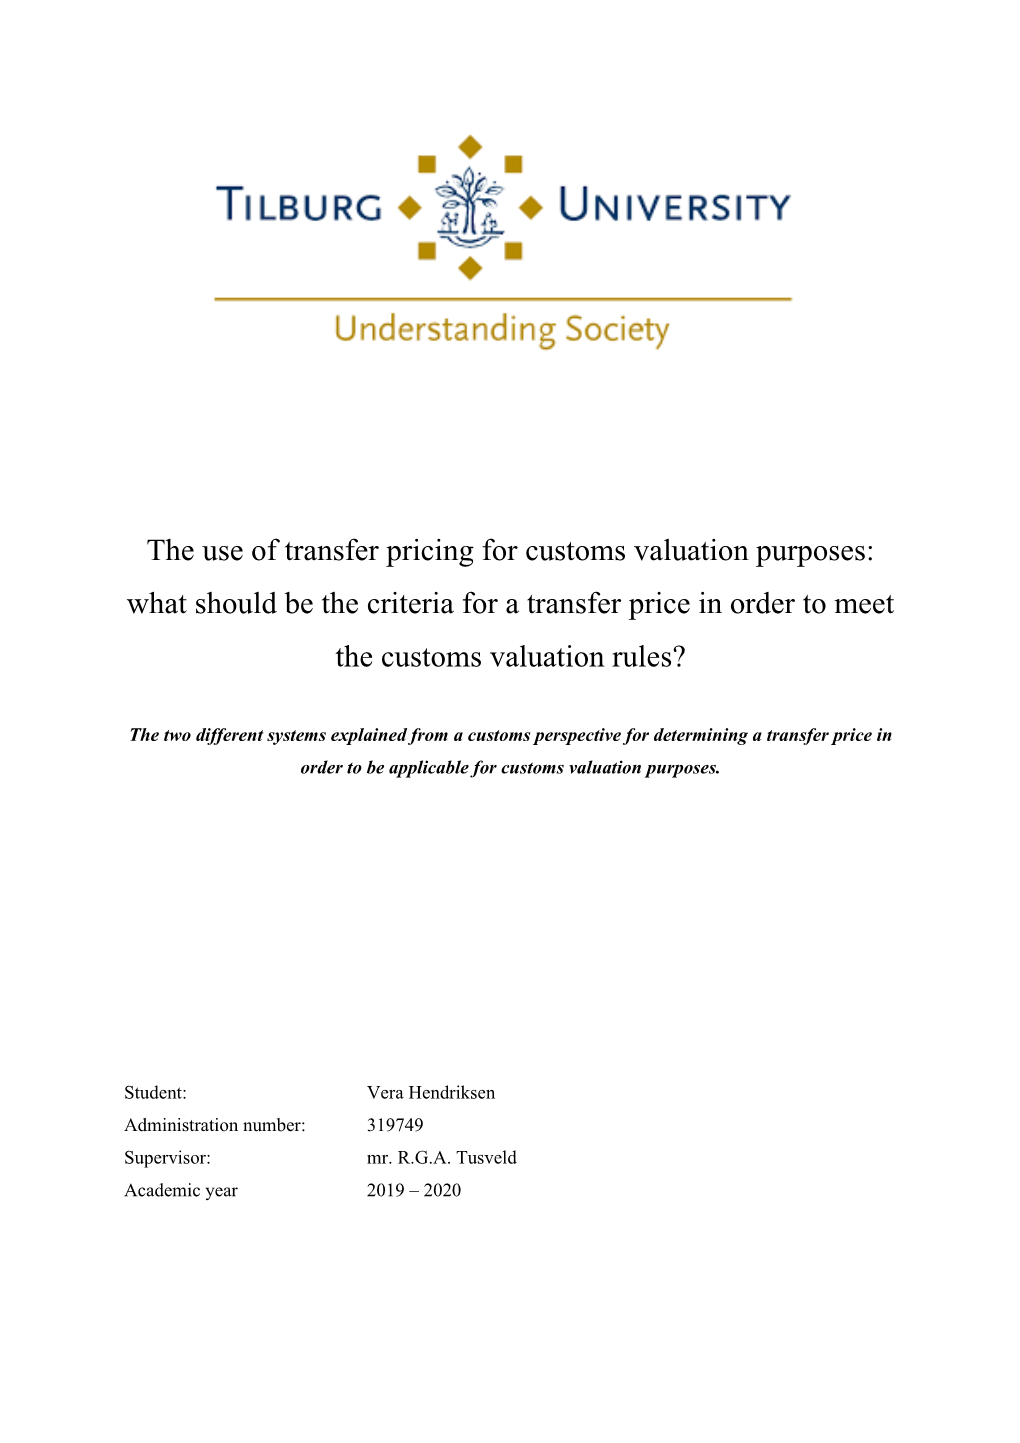 The Use of Transfer Pricing for Customs Valuation Purposes: What Should Be the Criteria for a Transfer Price in Order to Meet the Customs Valuation Rules?